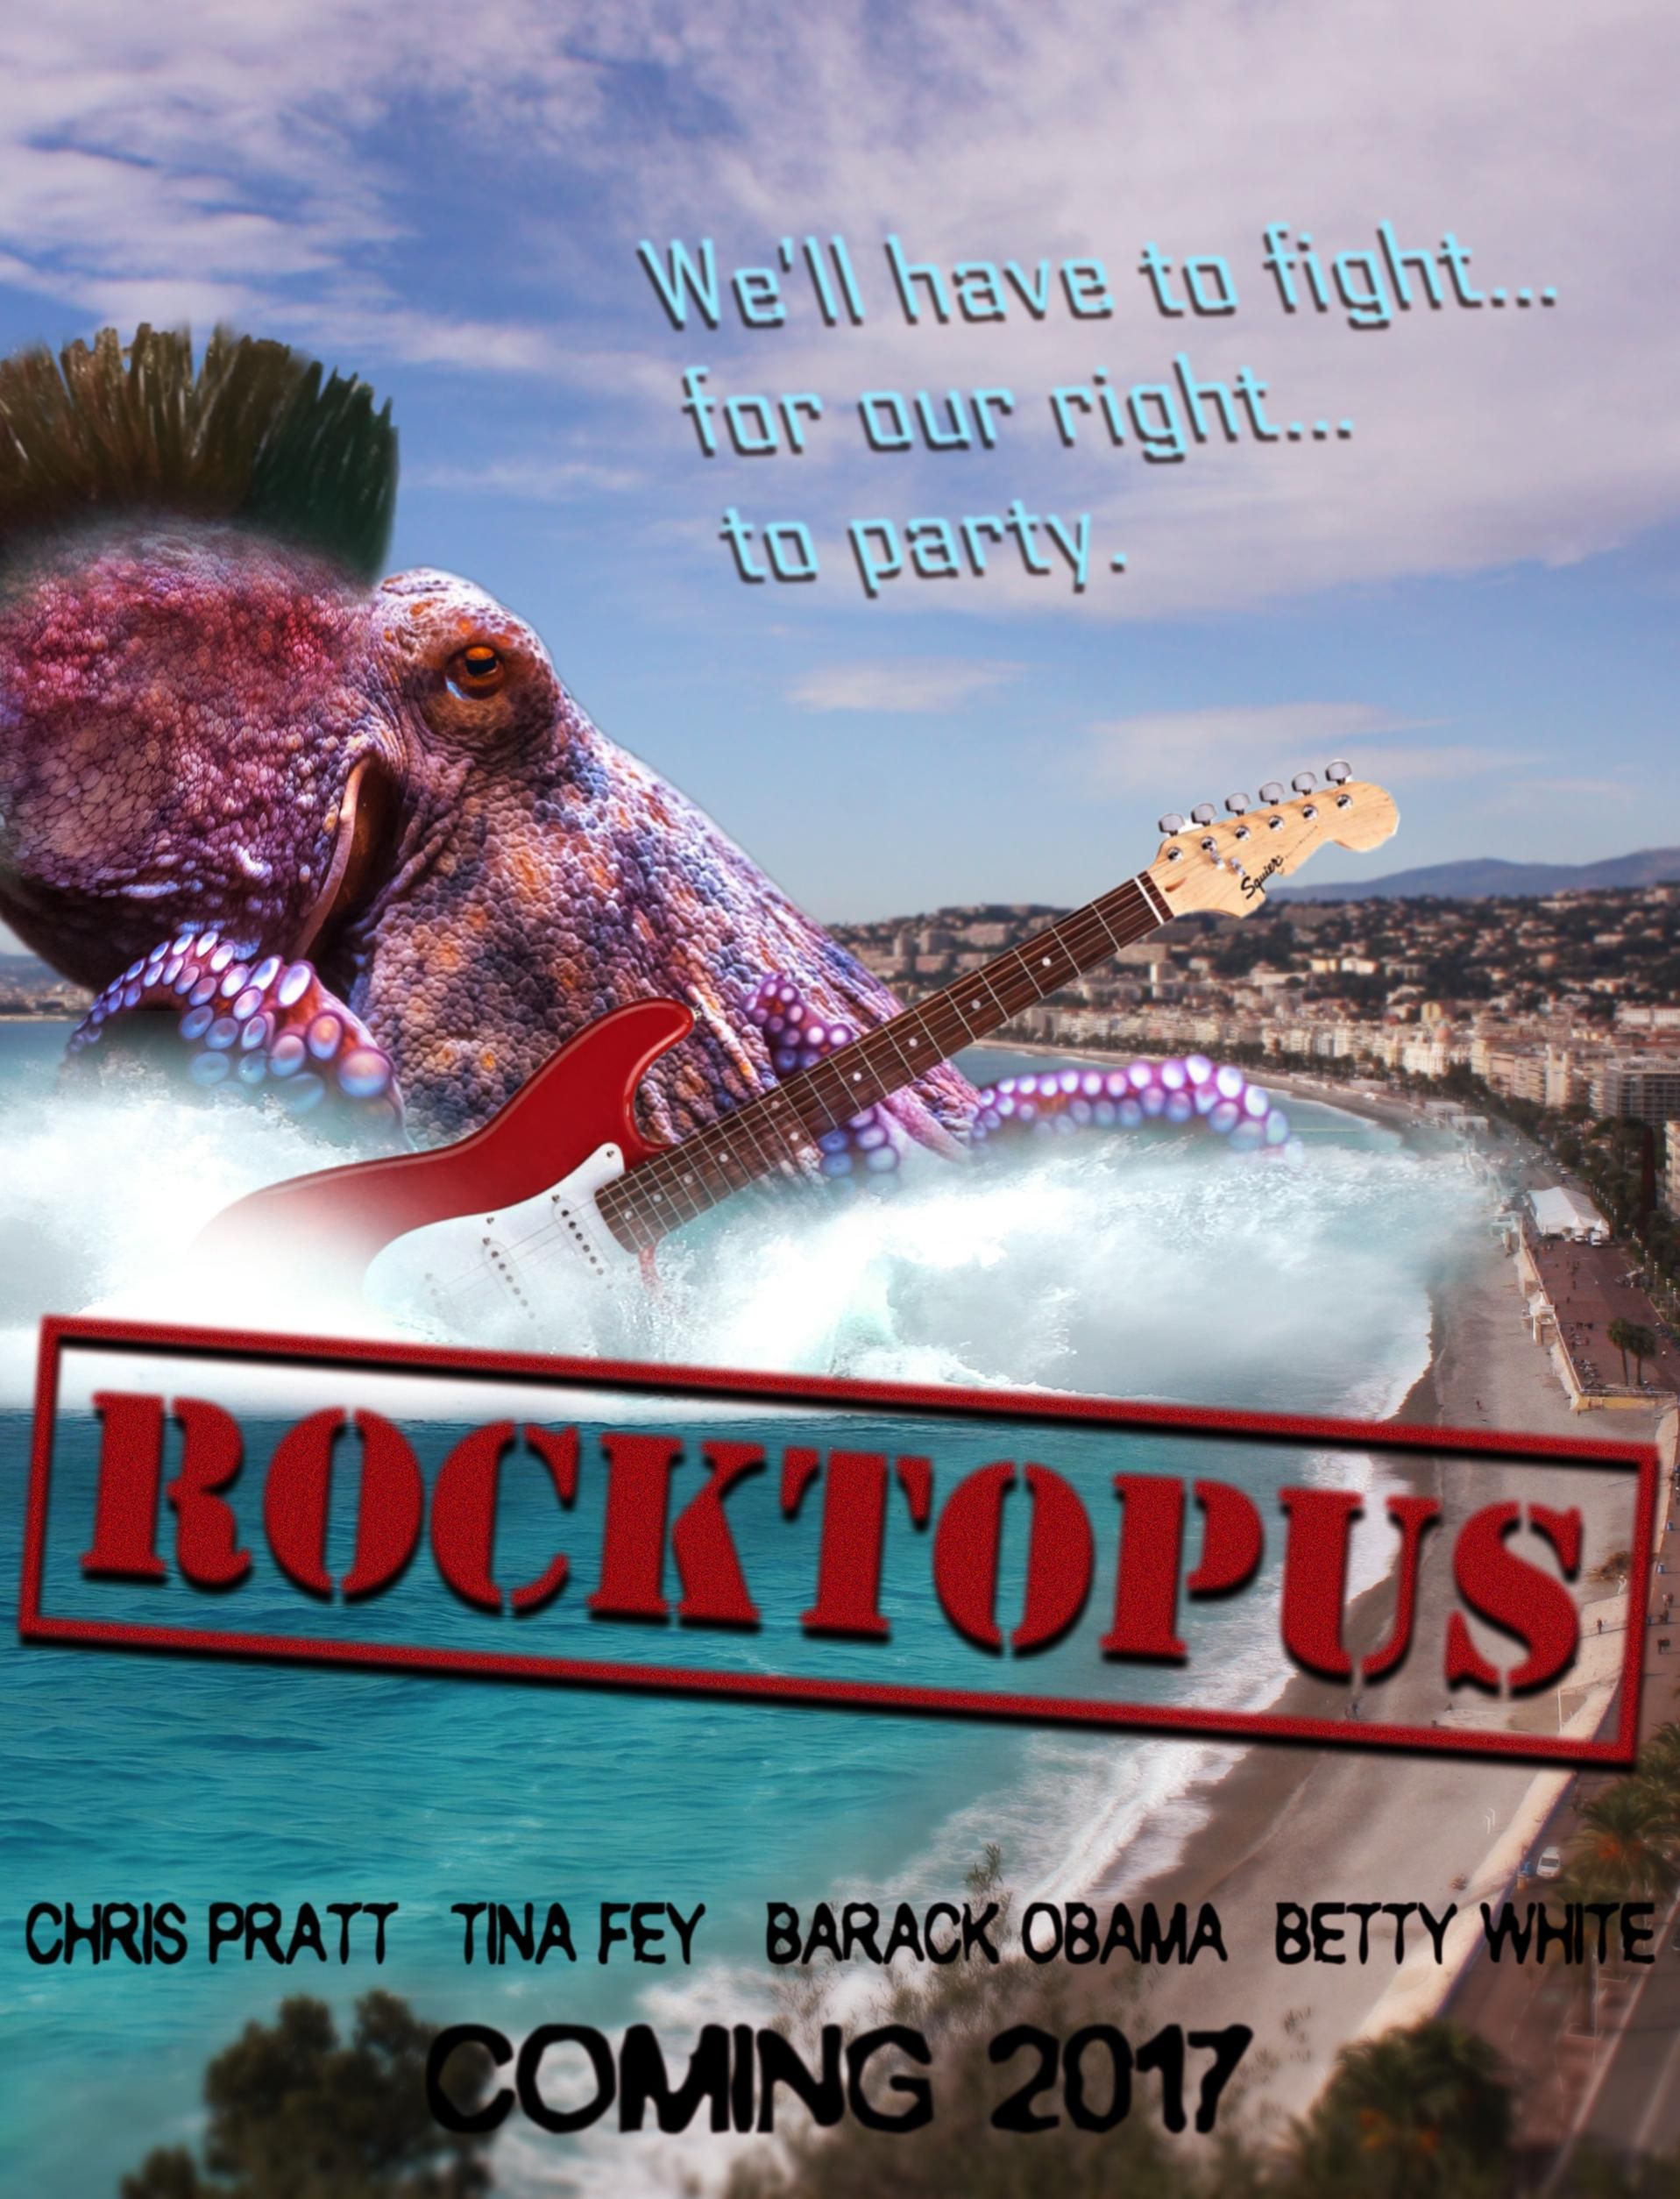 We had to make a B-movie poster with Photoshop in class today.